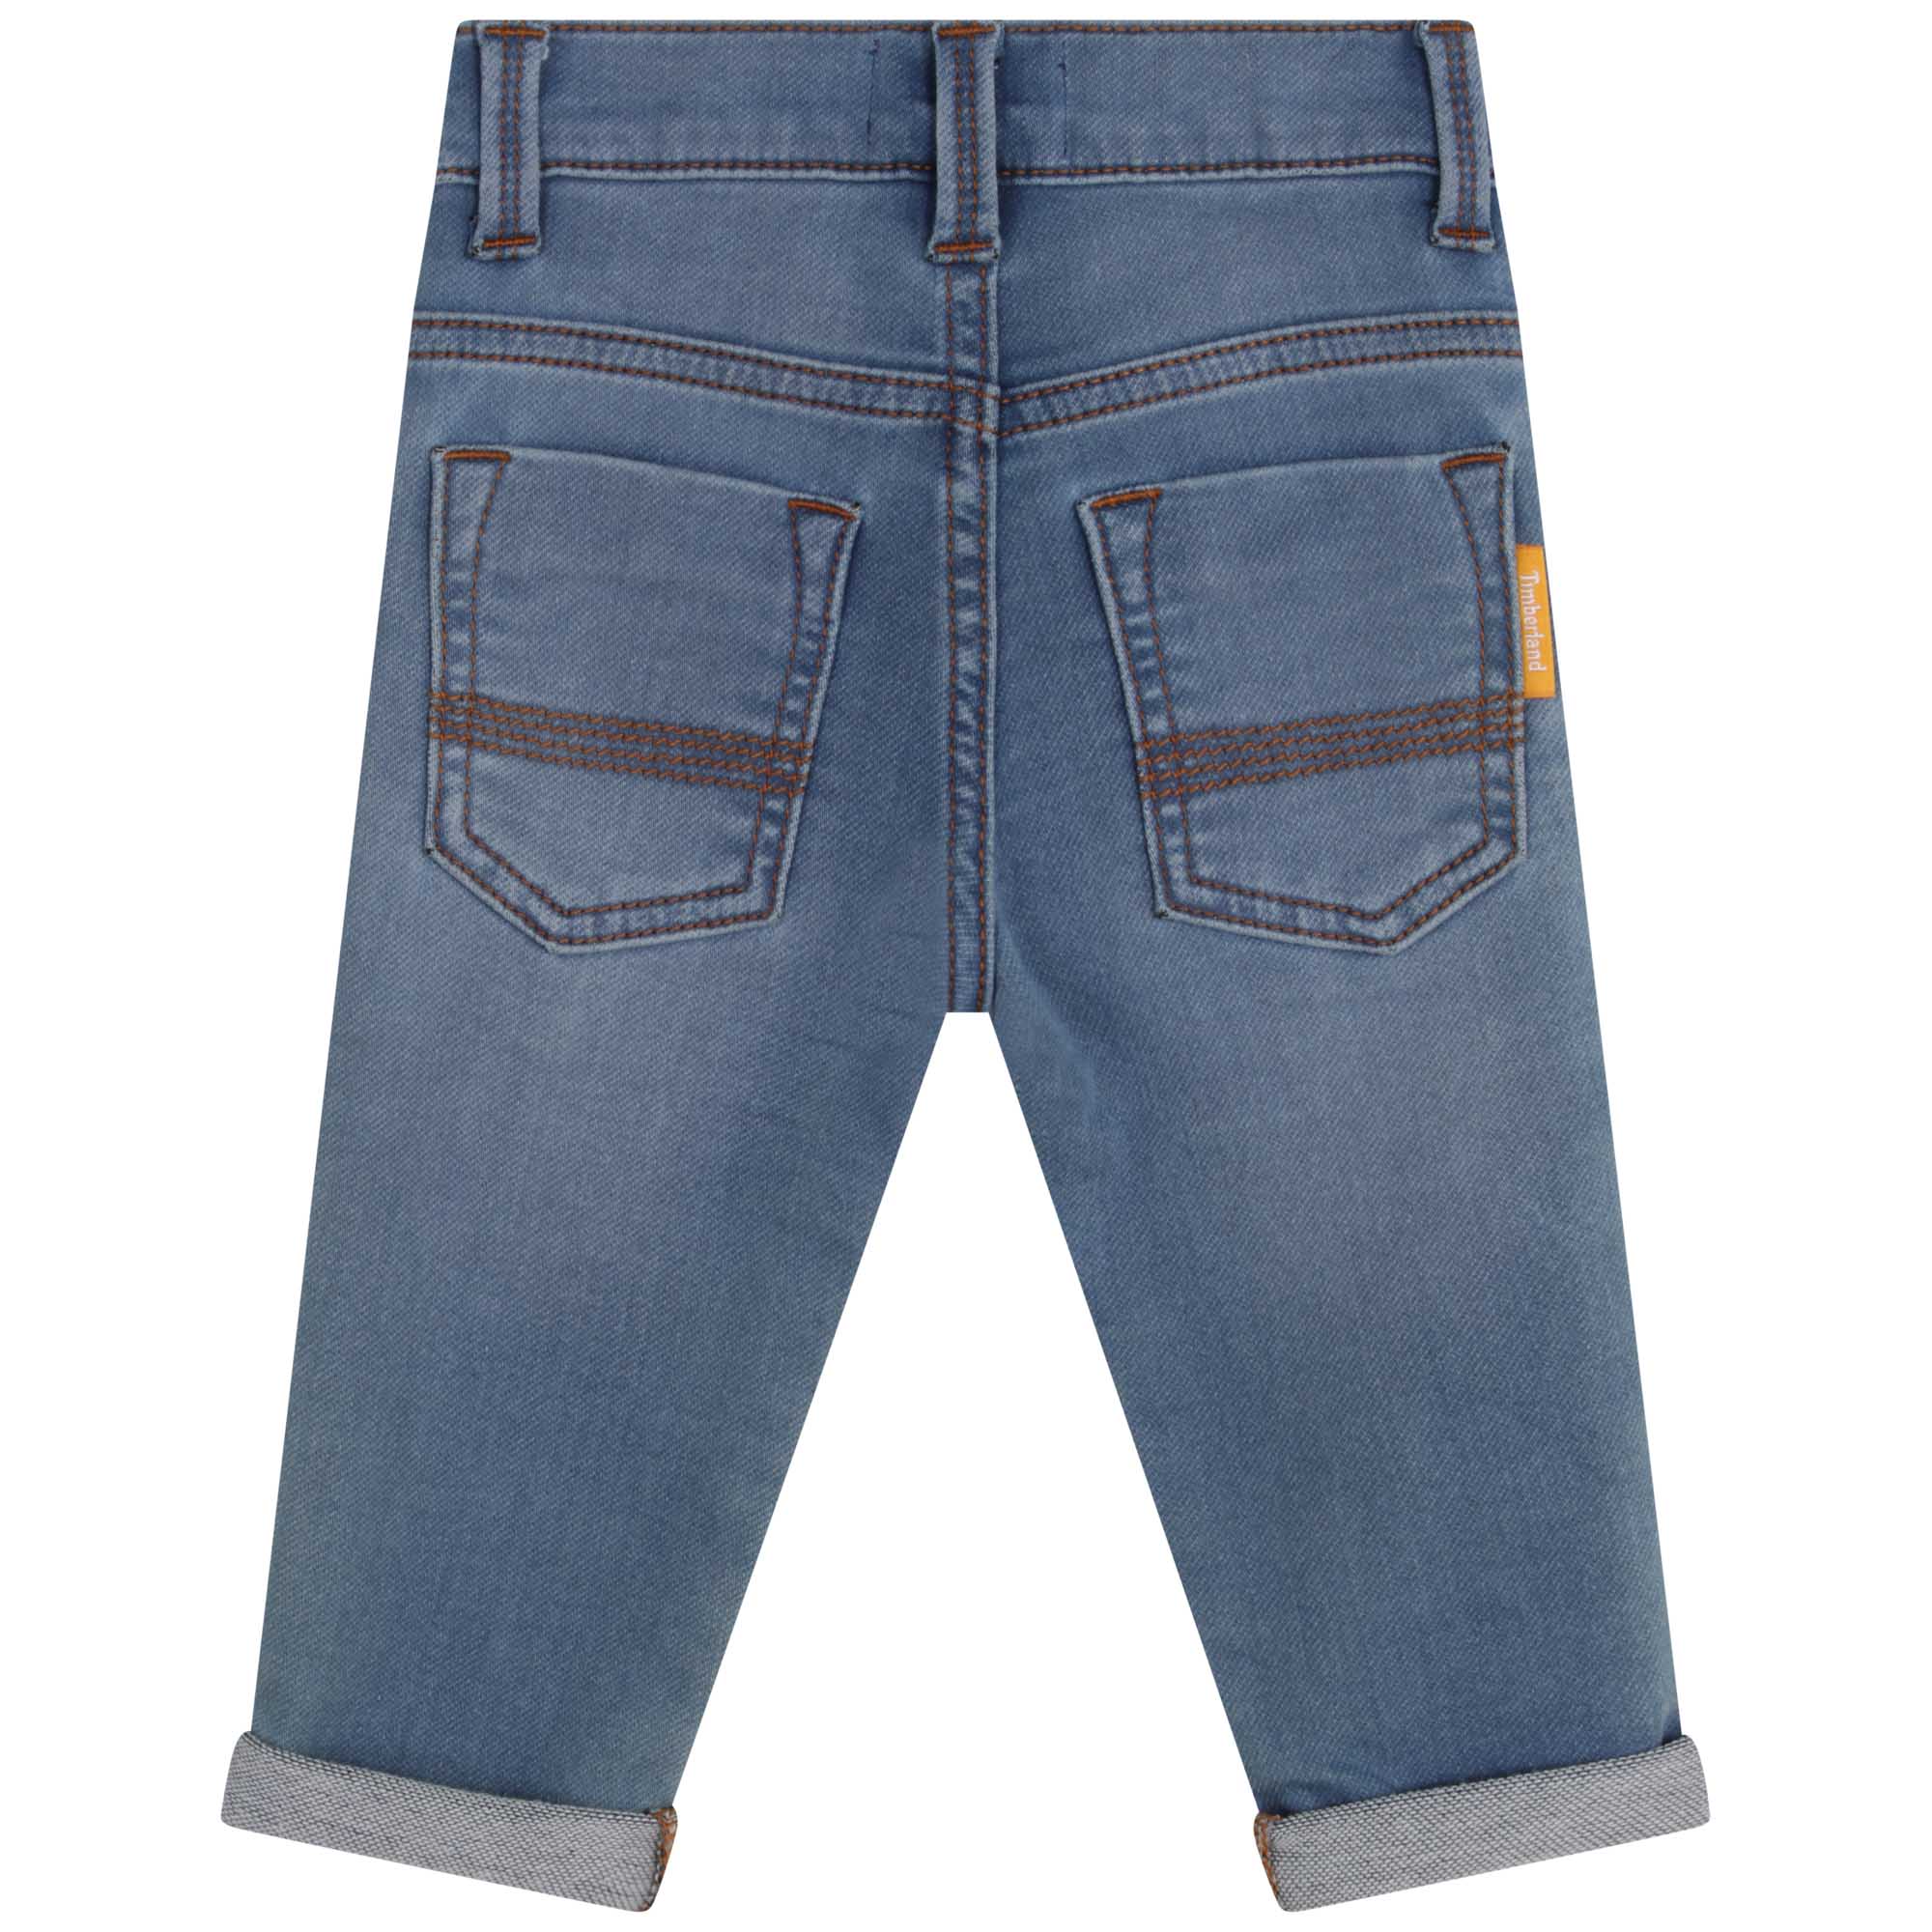 Jeans TIMBERLAND for BOY